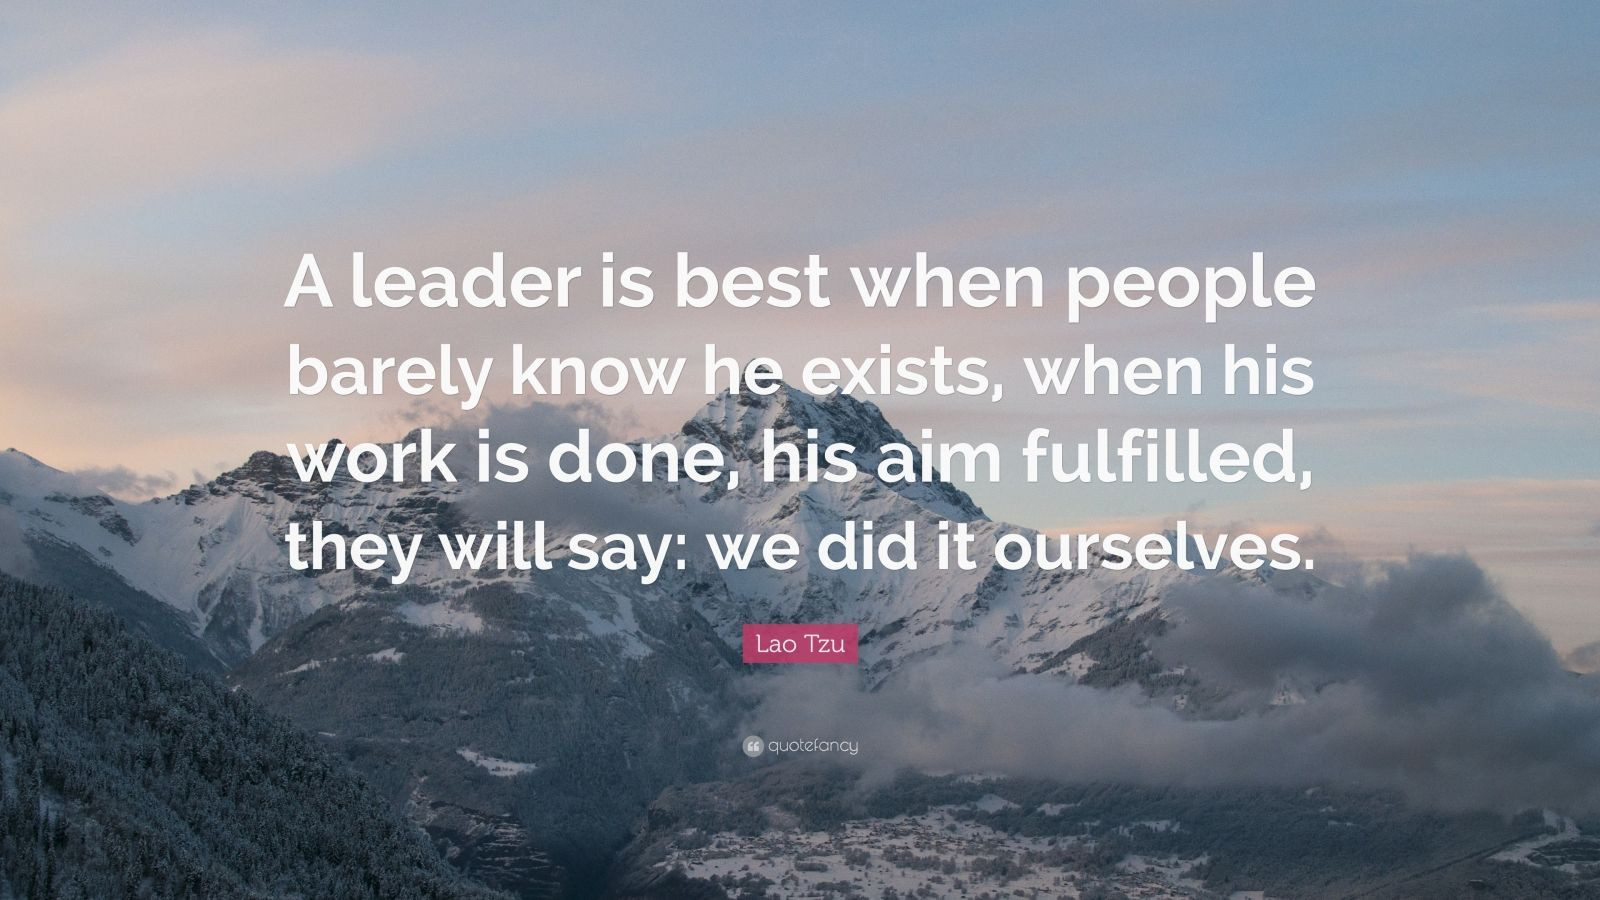 Lao Tzu Quotes Leadership
 Lao Tzu Quote “A leader is best when people barely know